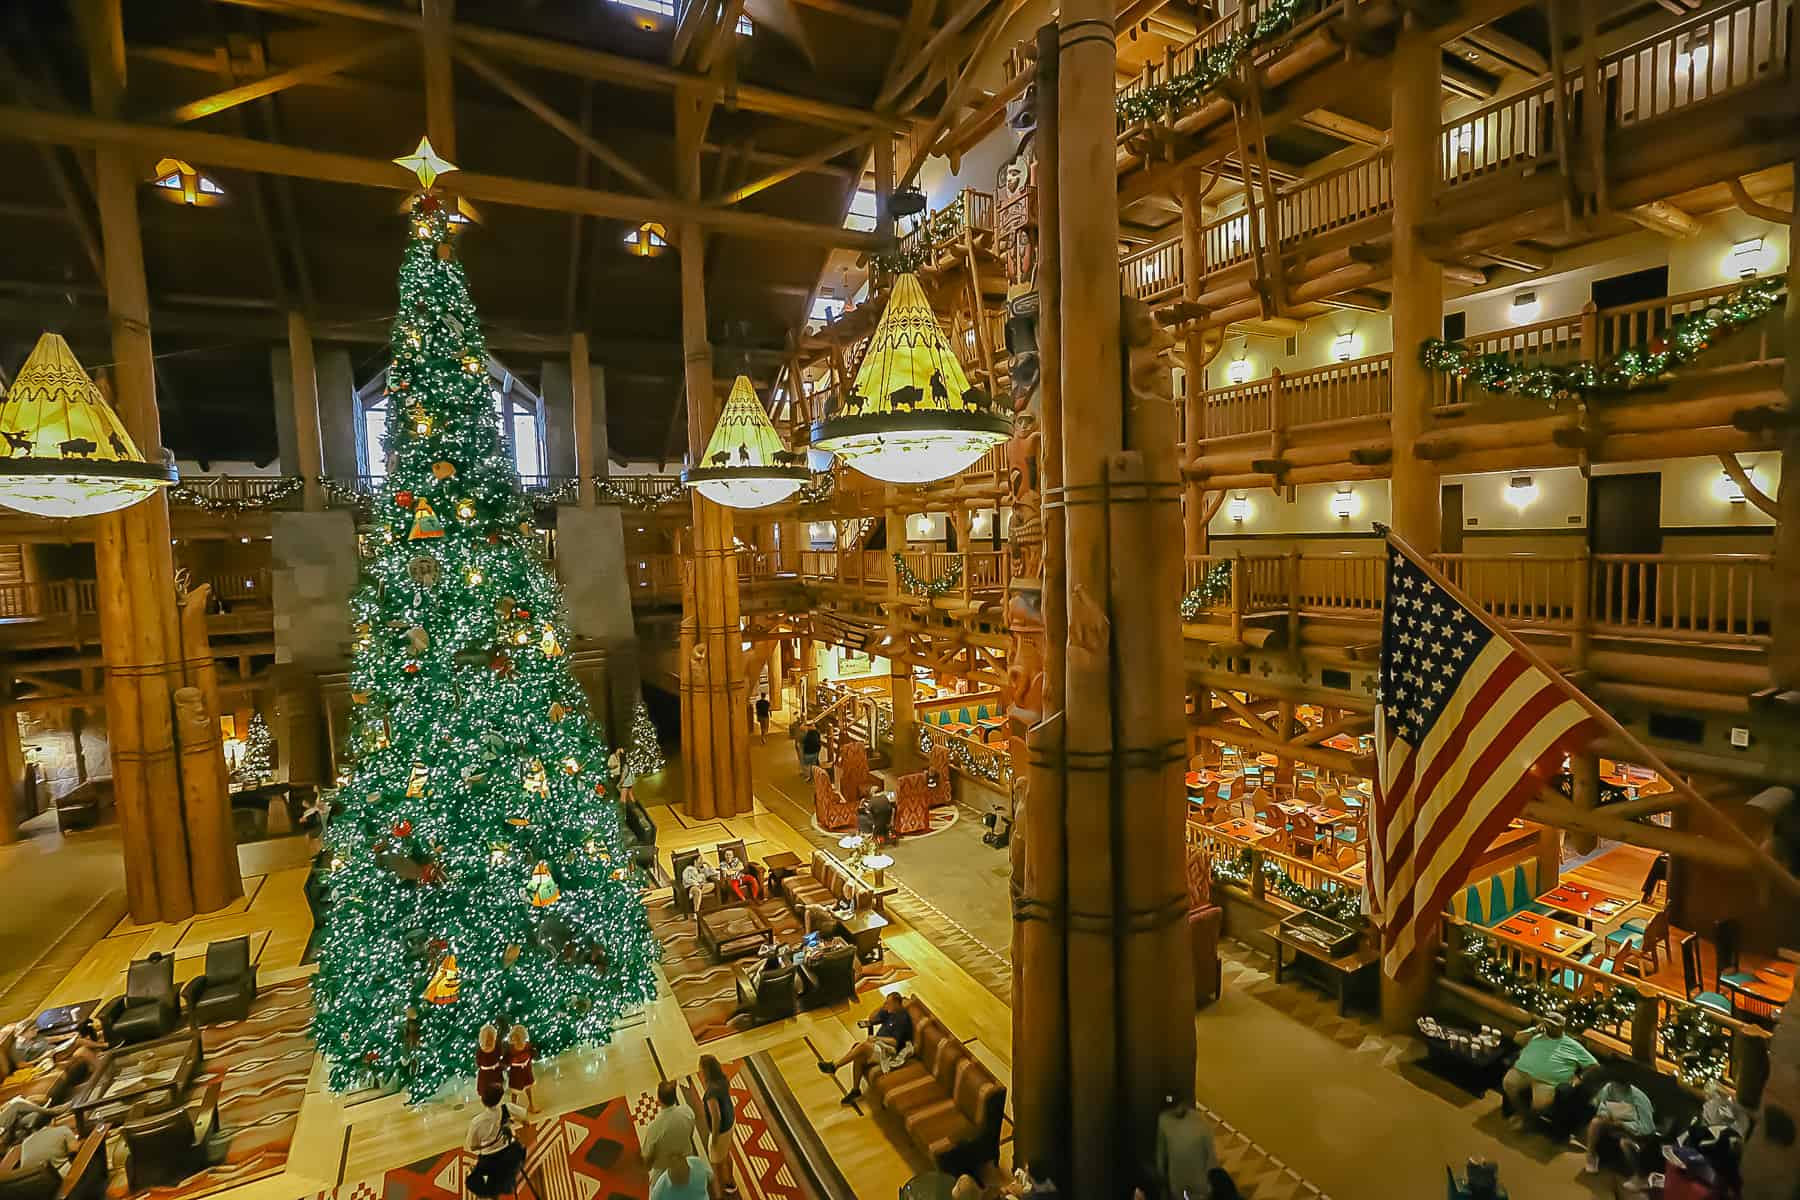 Christmas in the lobby of Disney's Wilderness Lodge